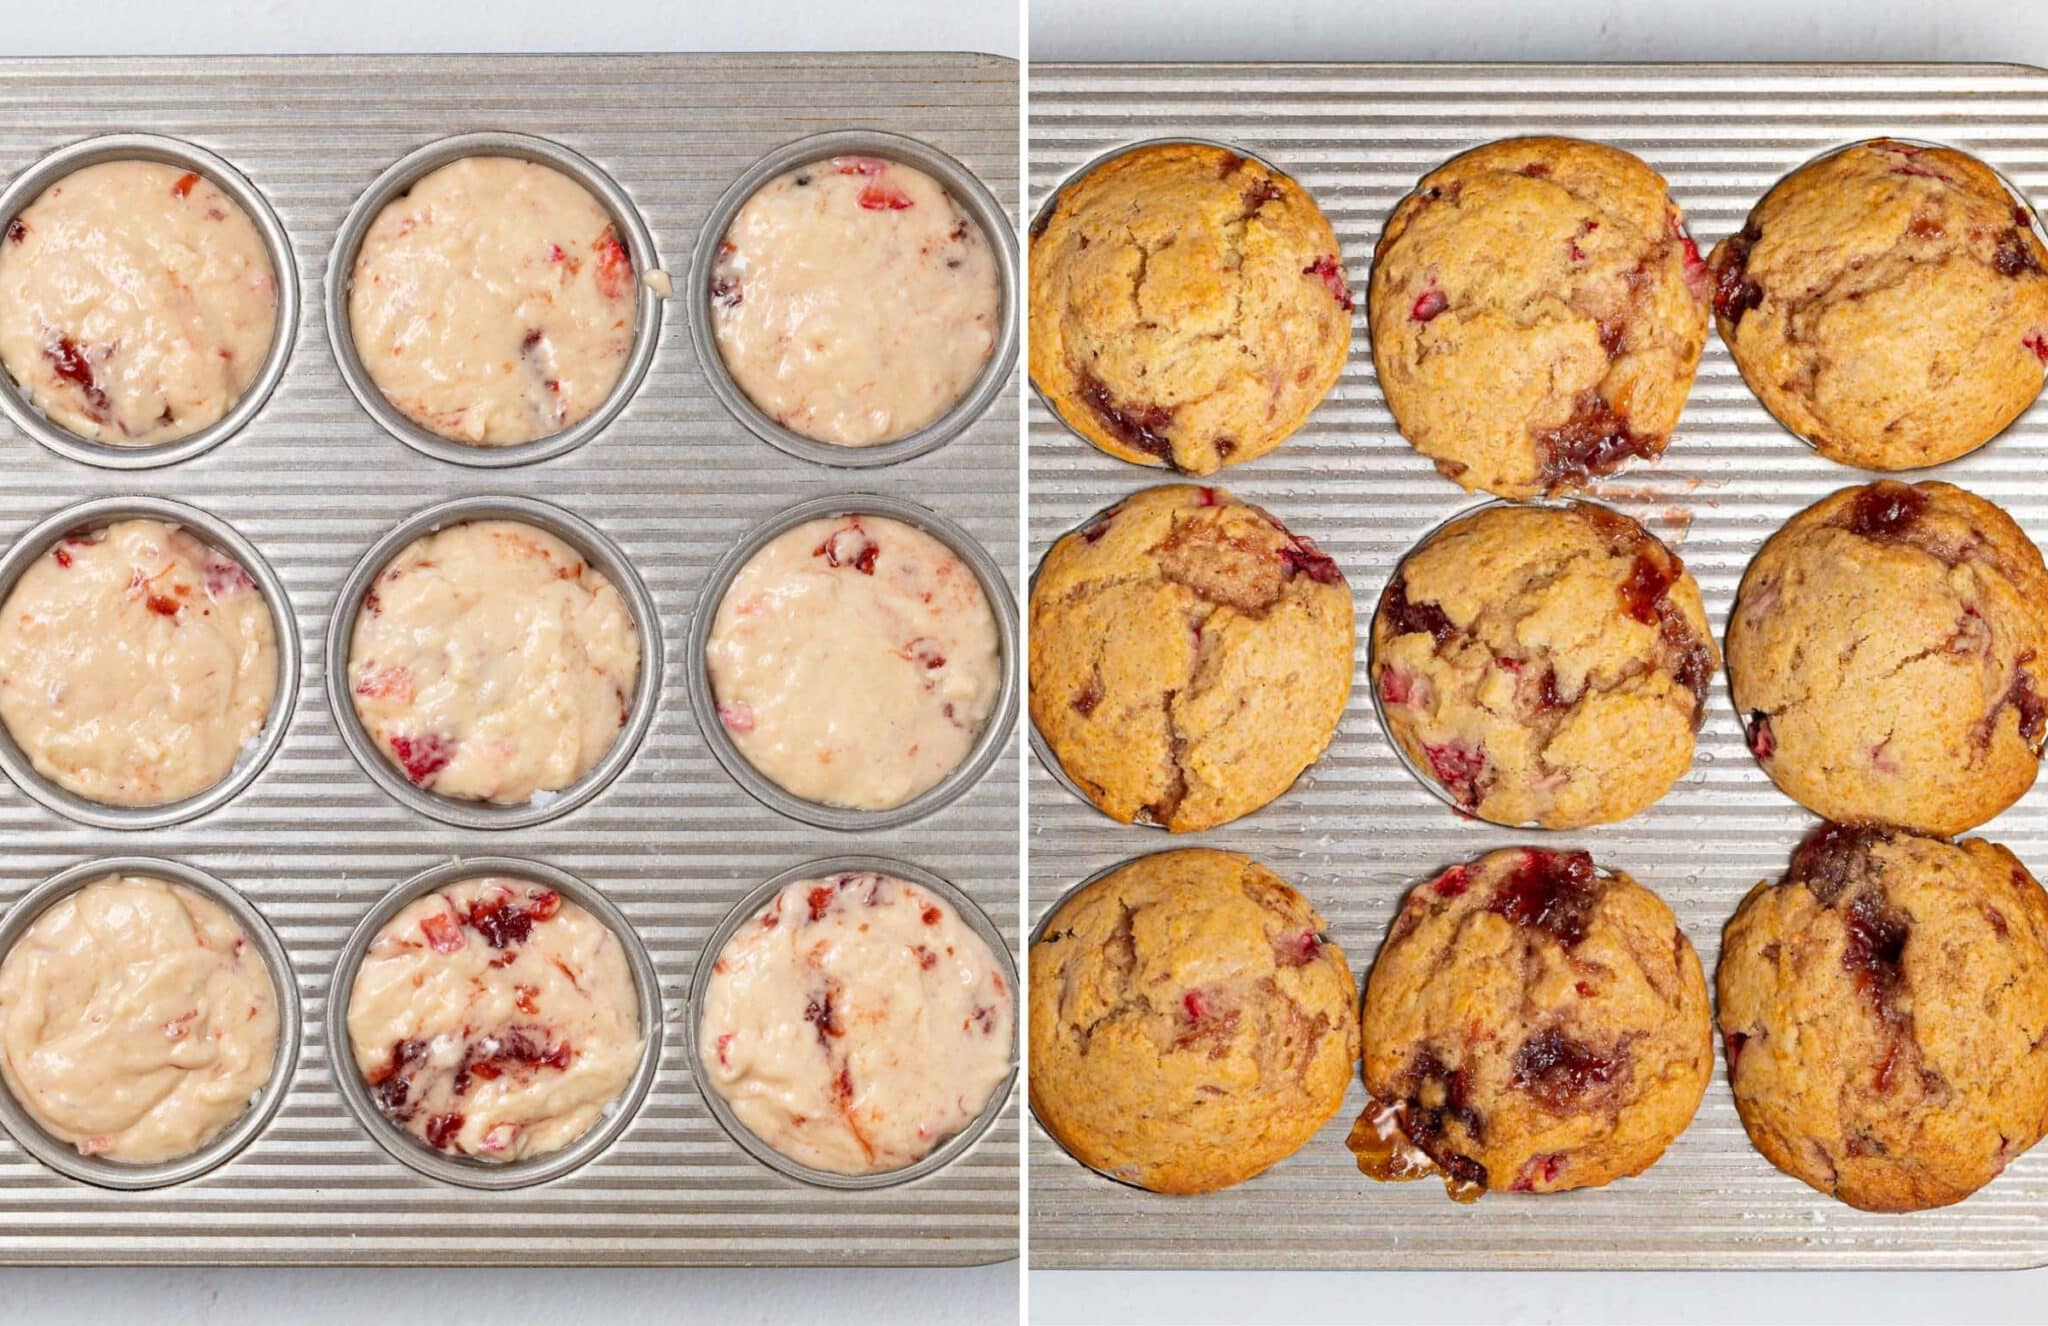 vegan strawberry muffins before baking and after baking